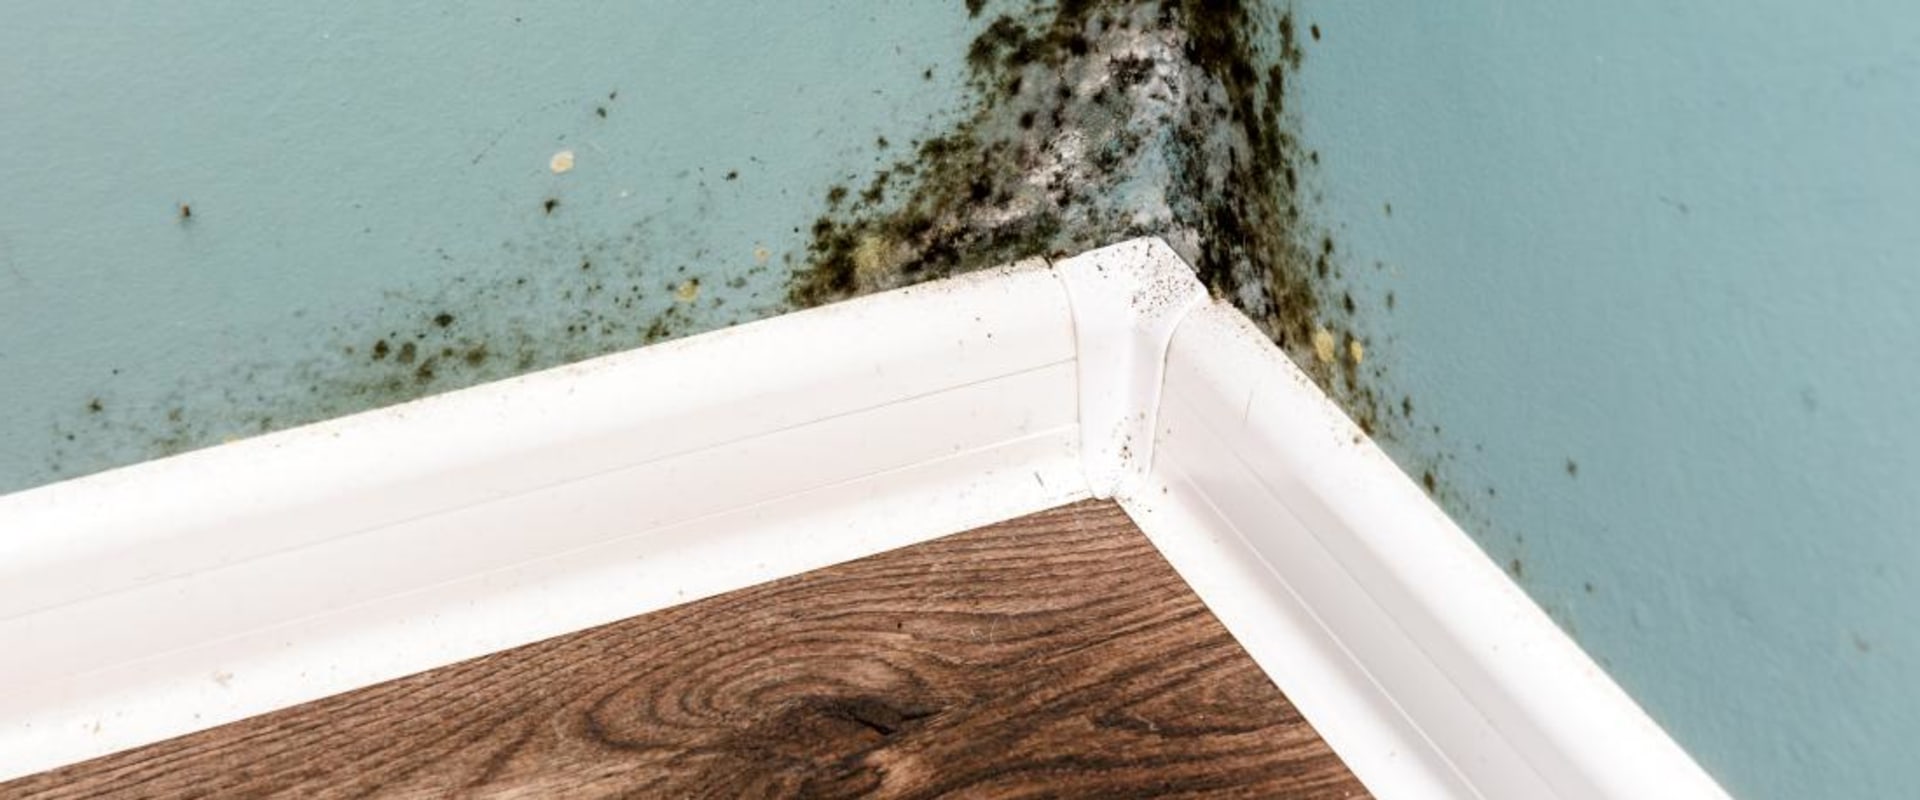 How to Detect and Prevent Mold in Your Home